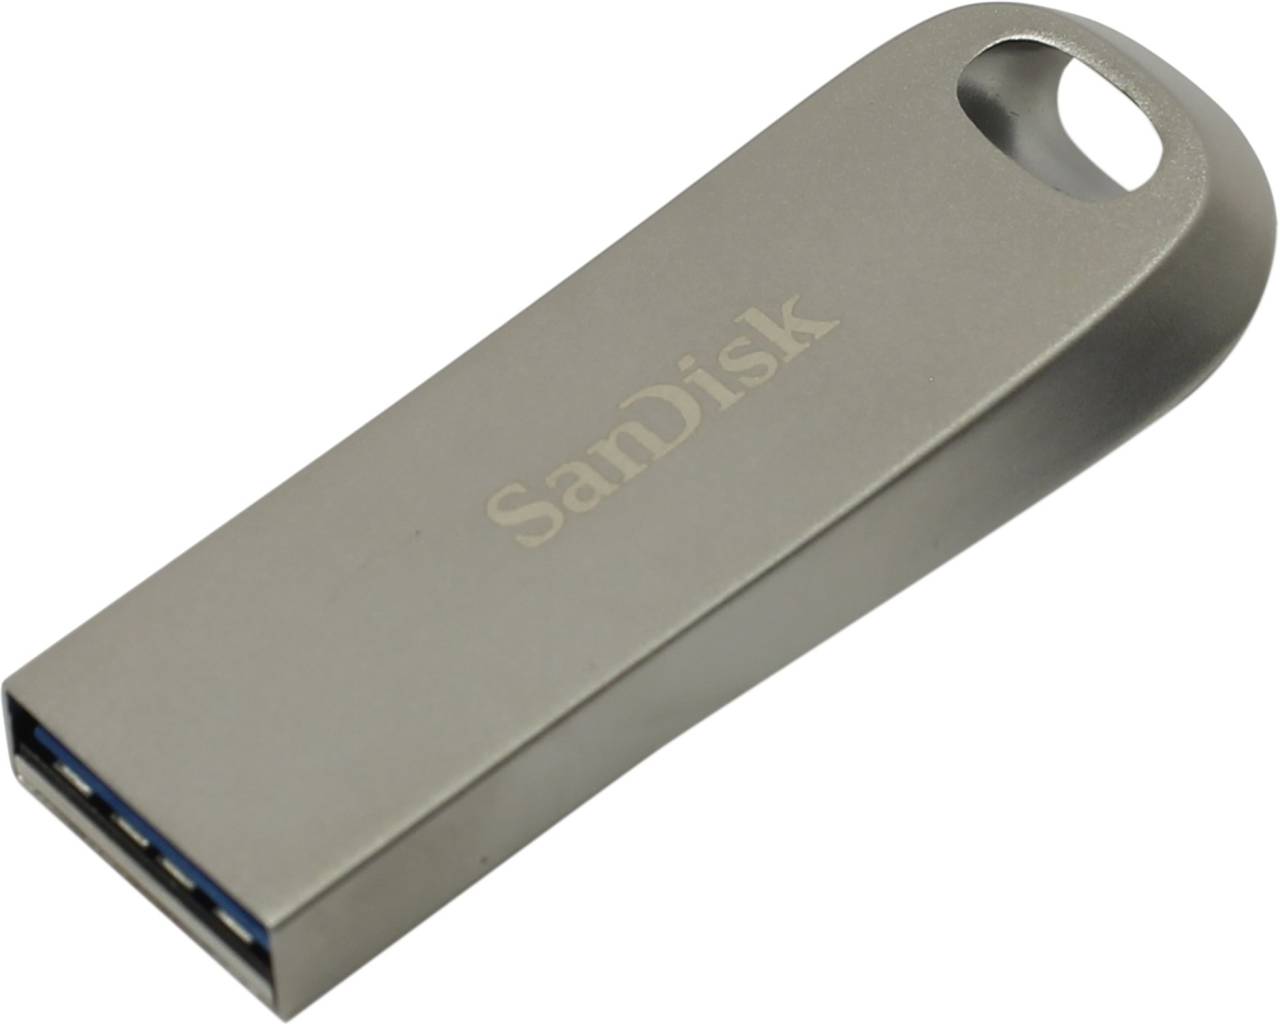   USB3.1 64Gb SanDisk Ultra Luxe [SDCZ74-064G-G46] (RTL)